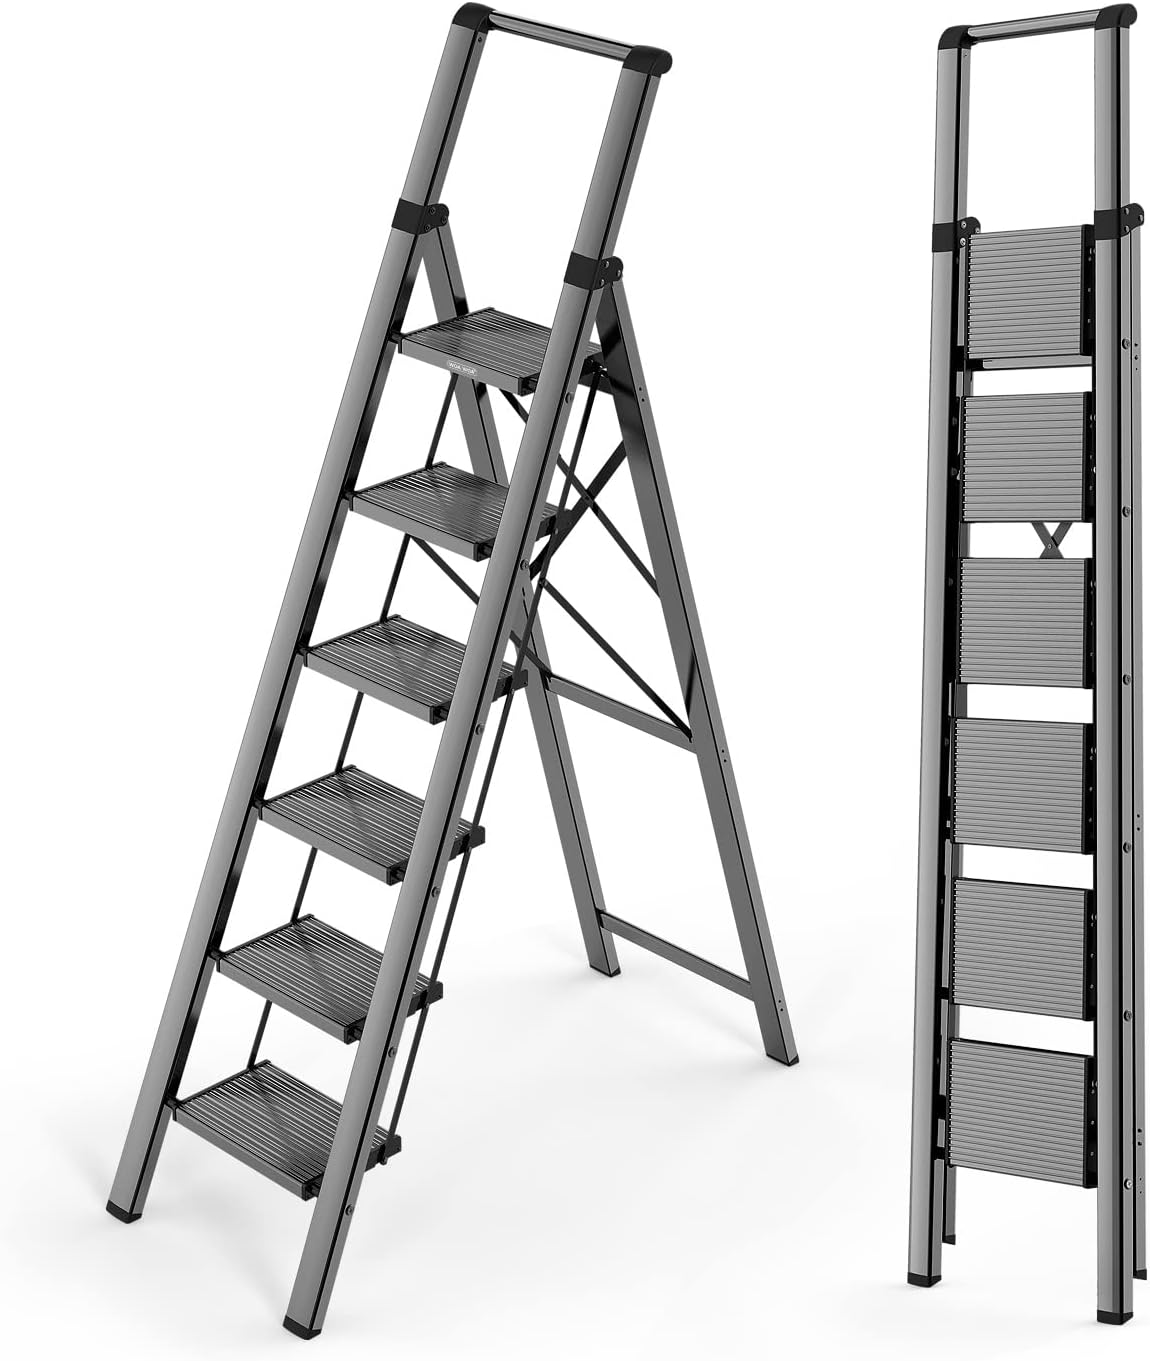 ladders for home use review